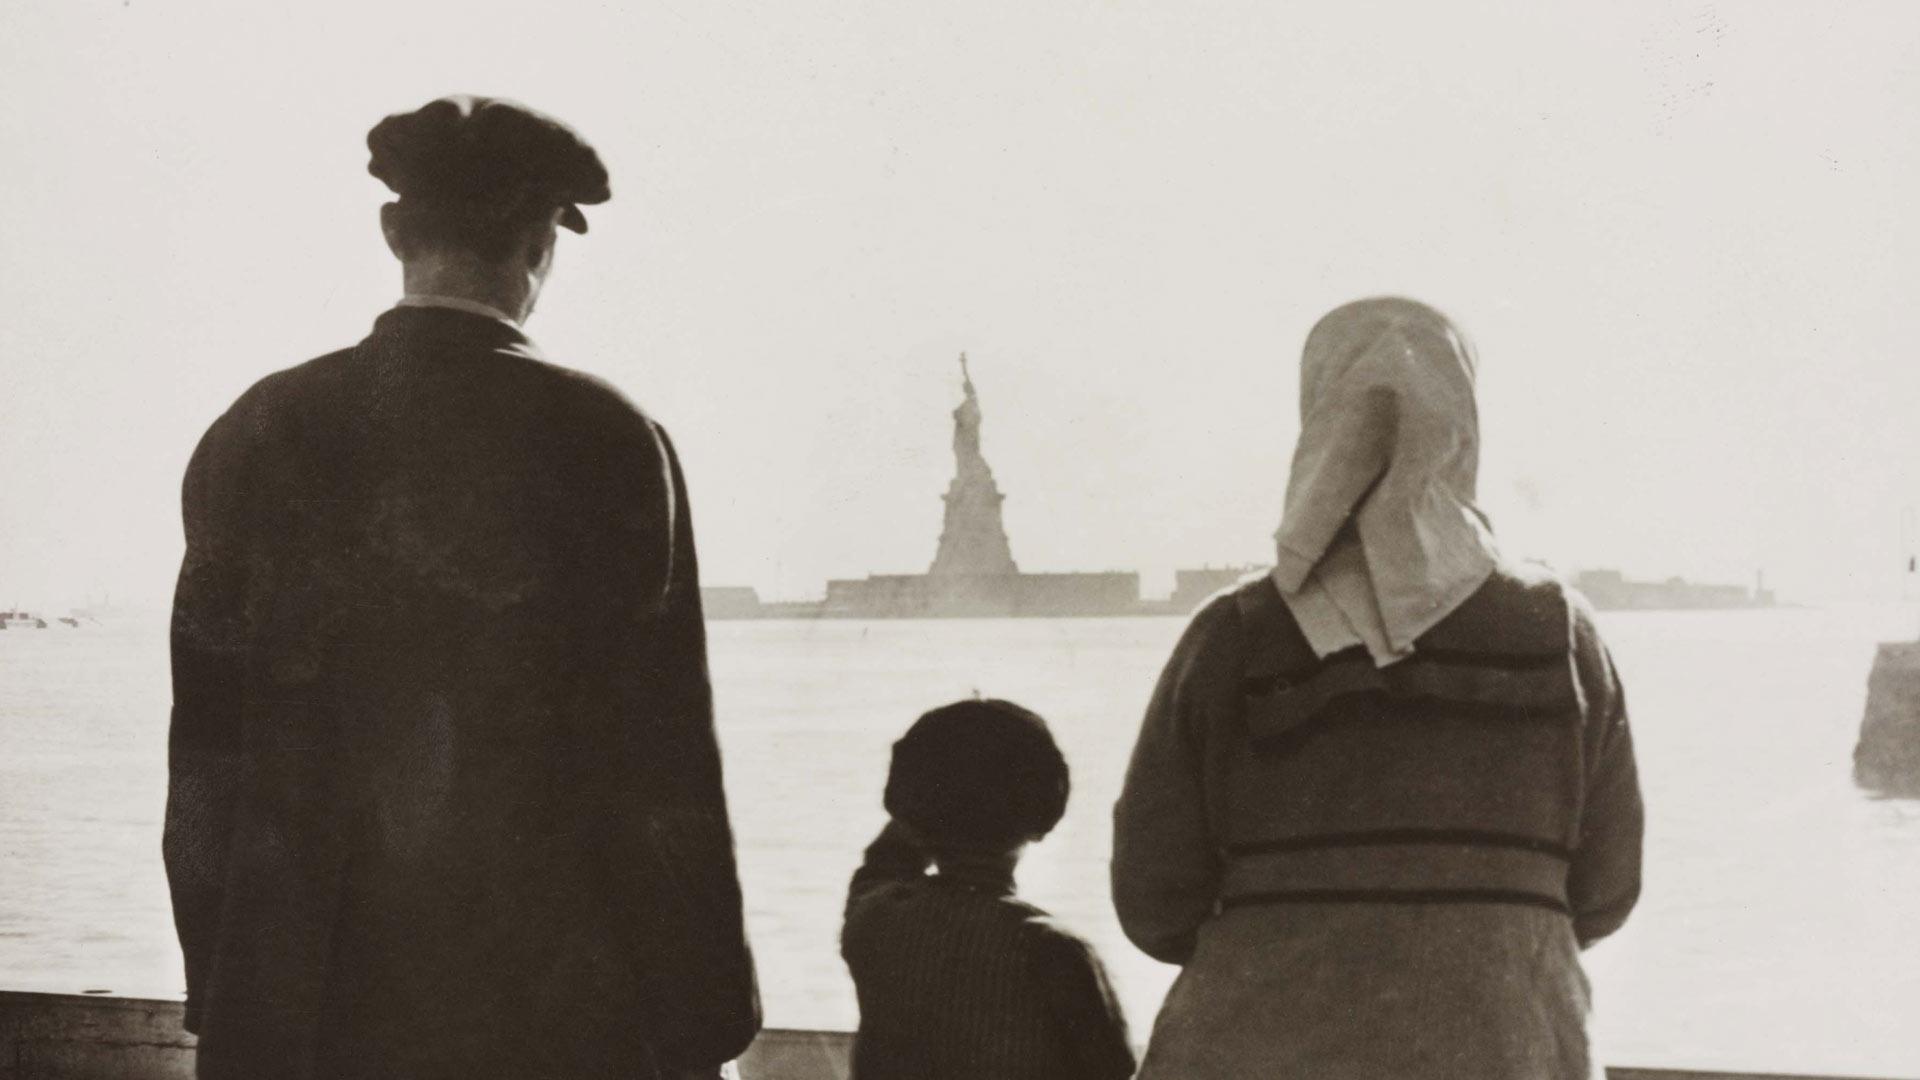 Jewish family stands, facing away from the camera, looking at the Statue of Liberty in the background